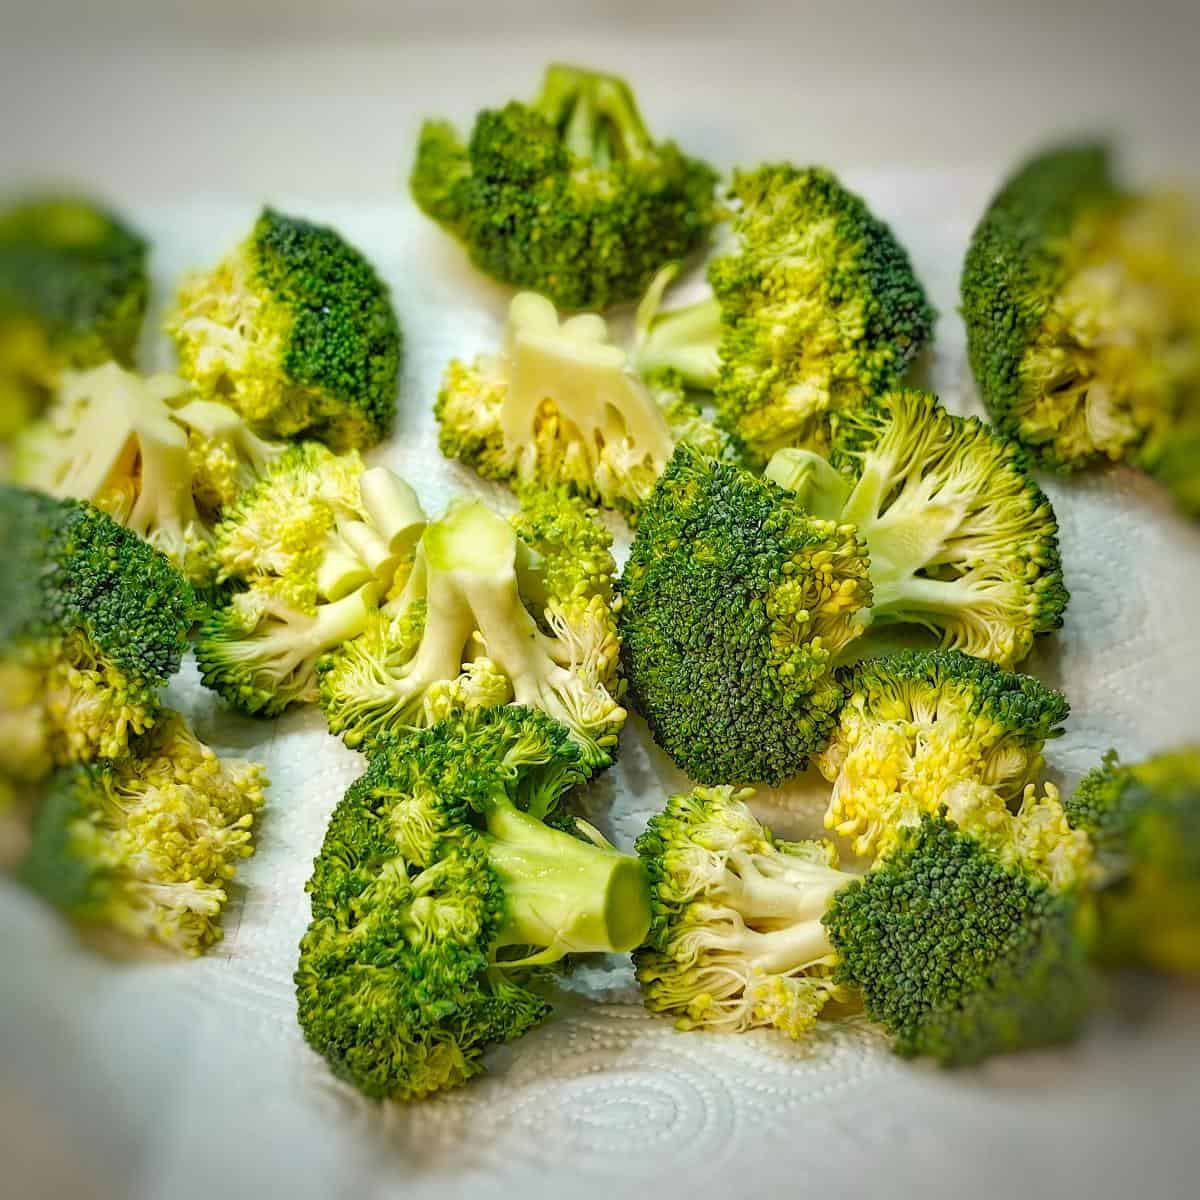 separate the broccoli into small florets